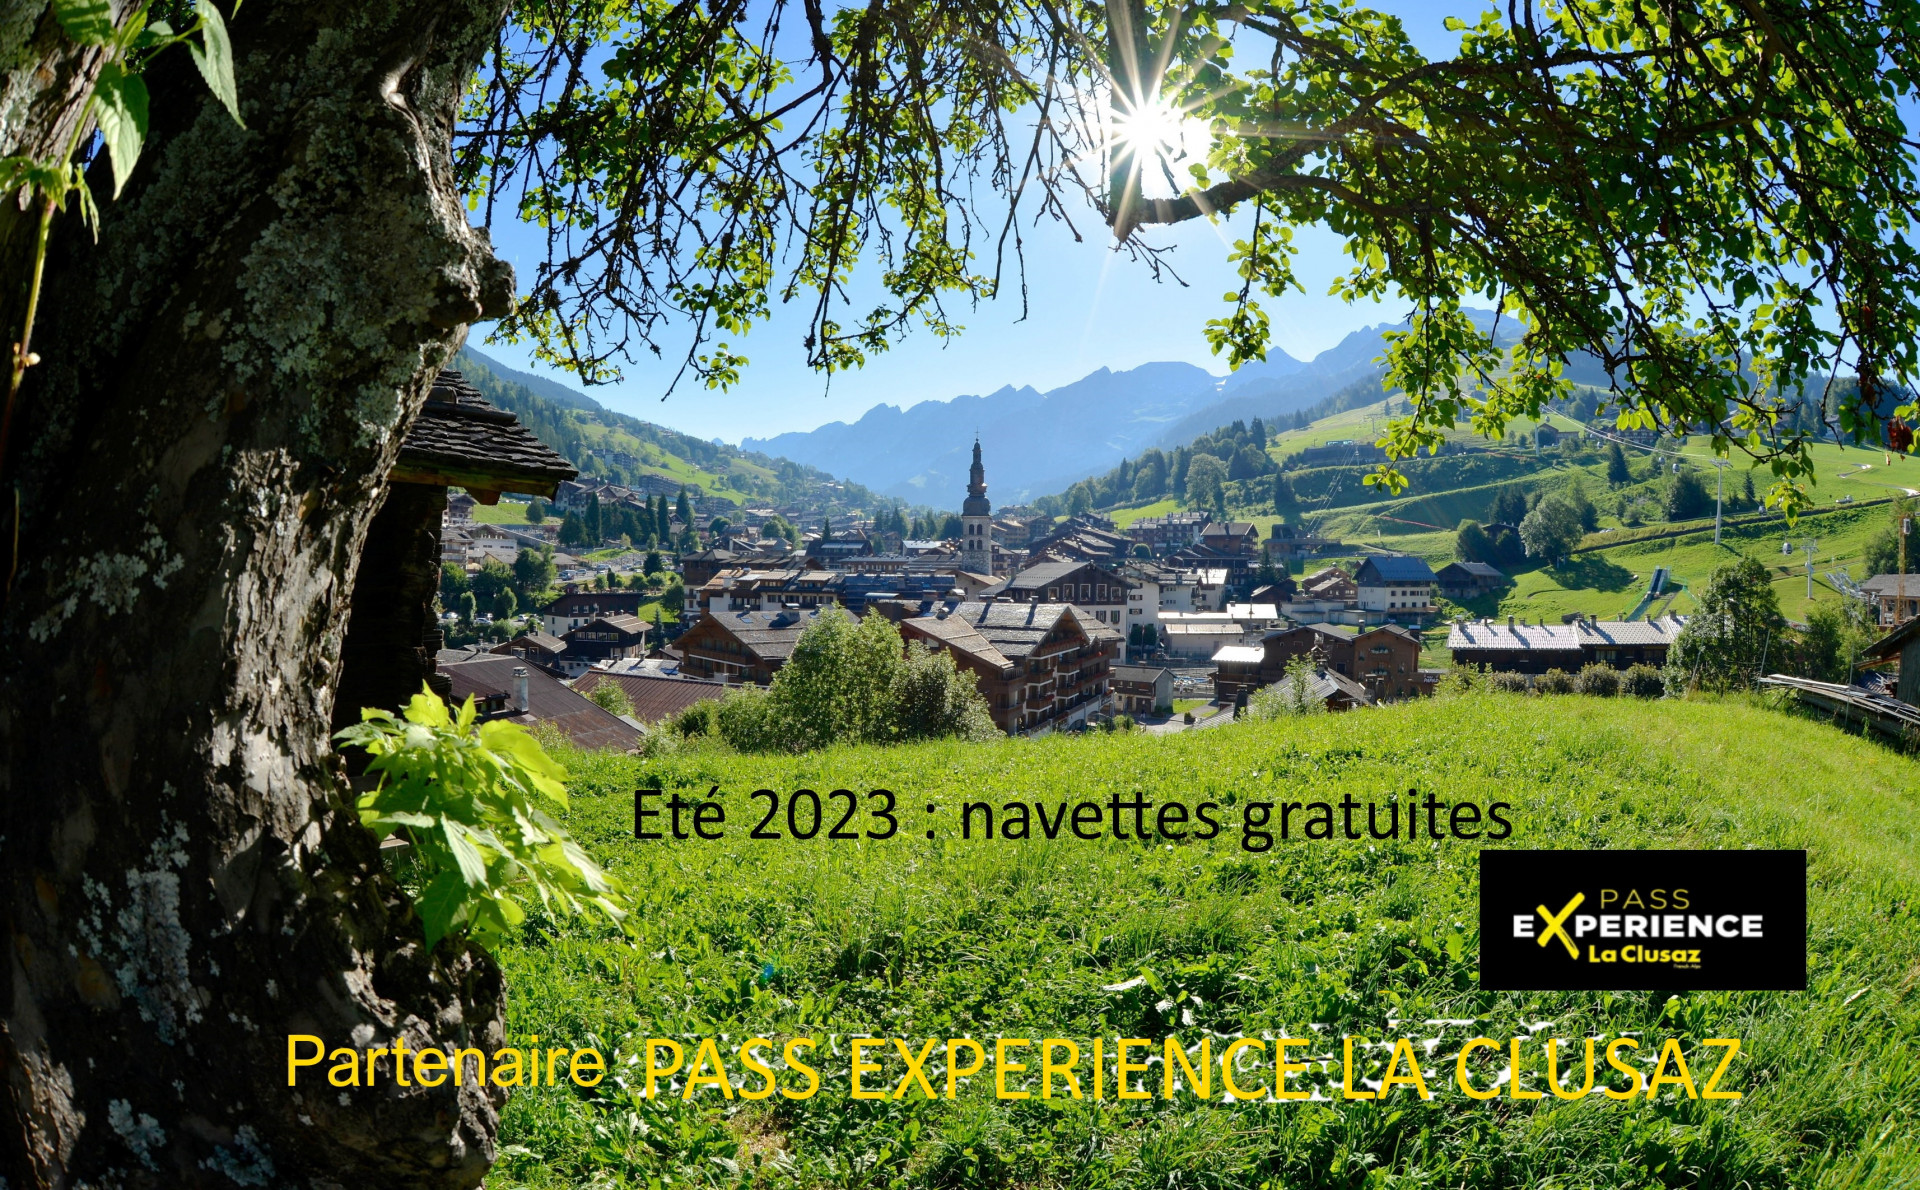 site-t-pass6experience-2023-395